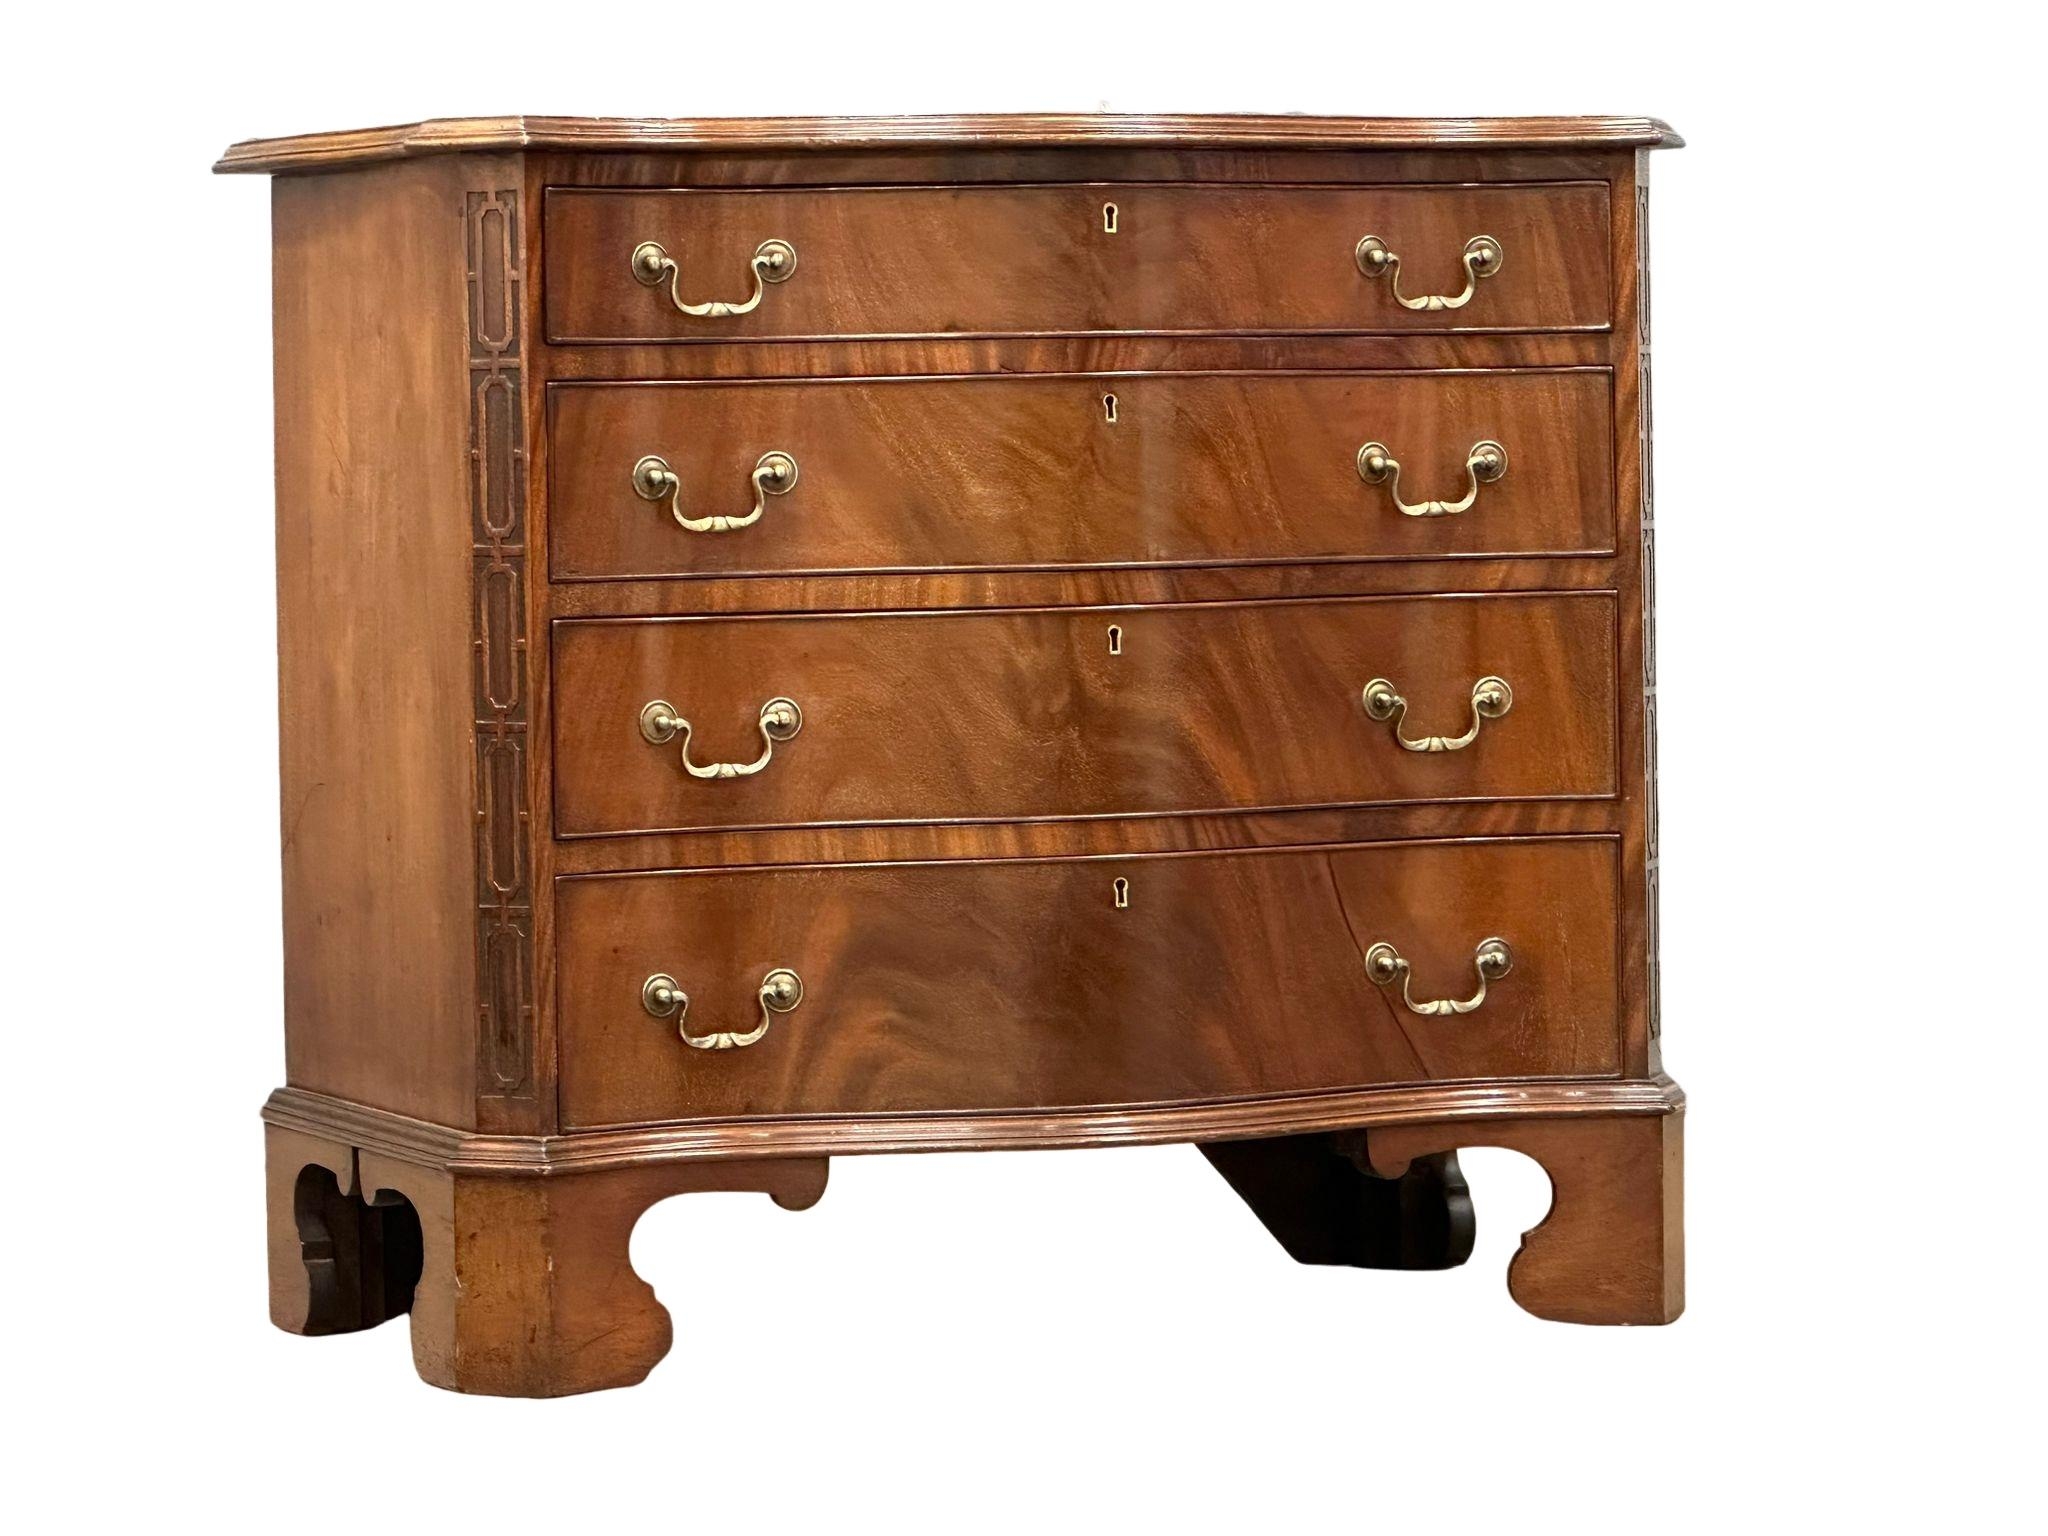 A good quality late 19th century Chippendale Revival mahogany serpentine front chest of drawers. - Image 13 of 22